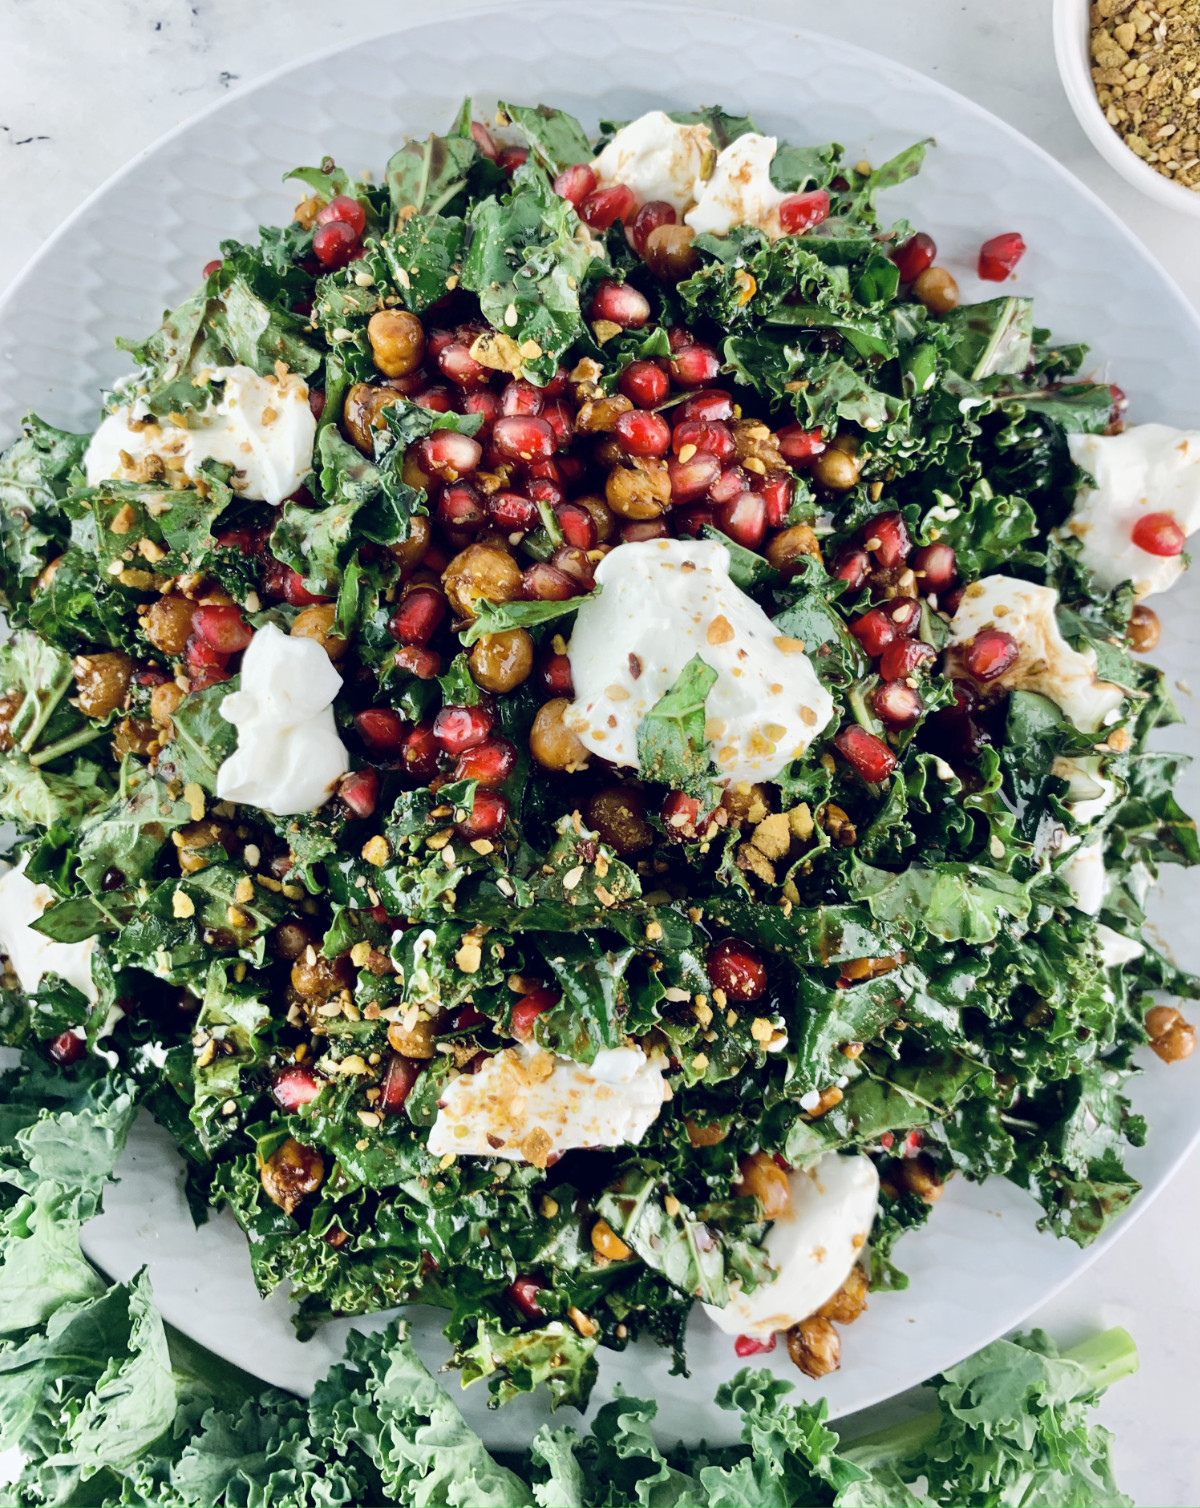 A close-up of Kale pomegranat salad on a white plate with kale and dukkah on the side.